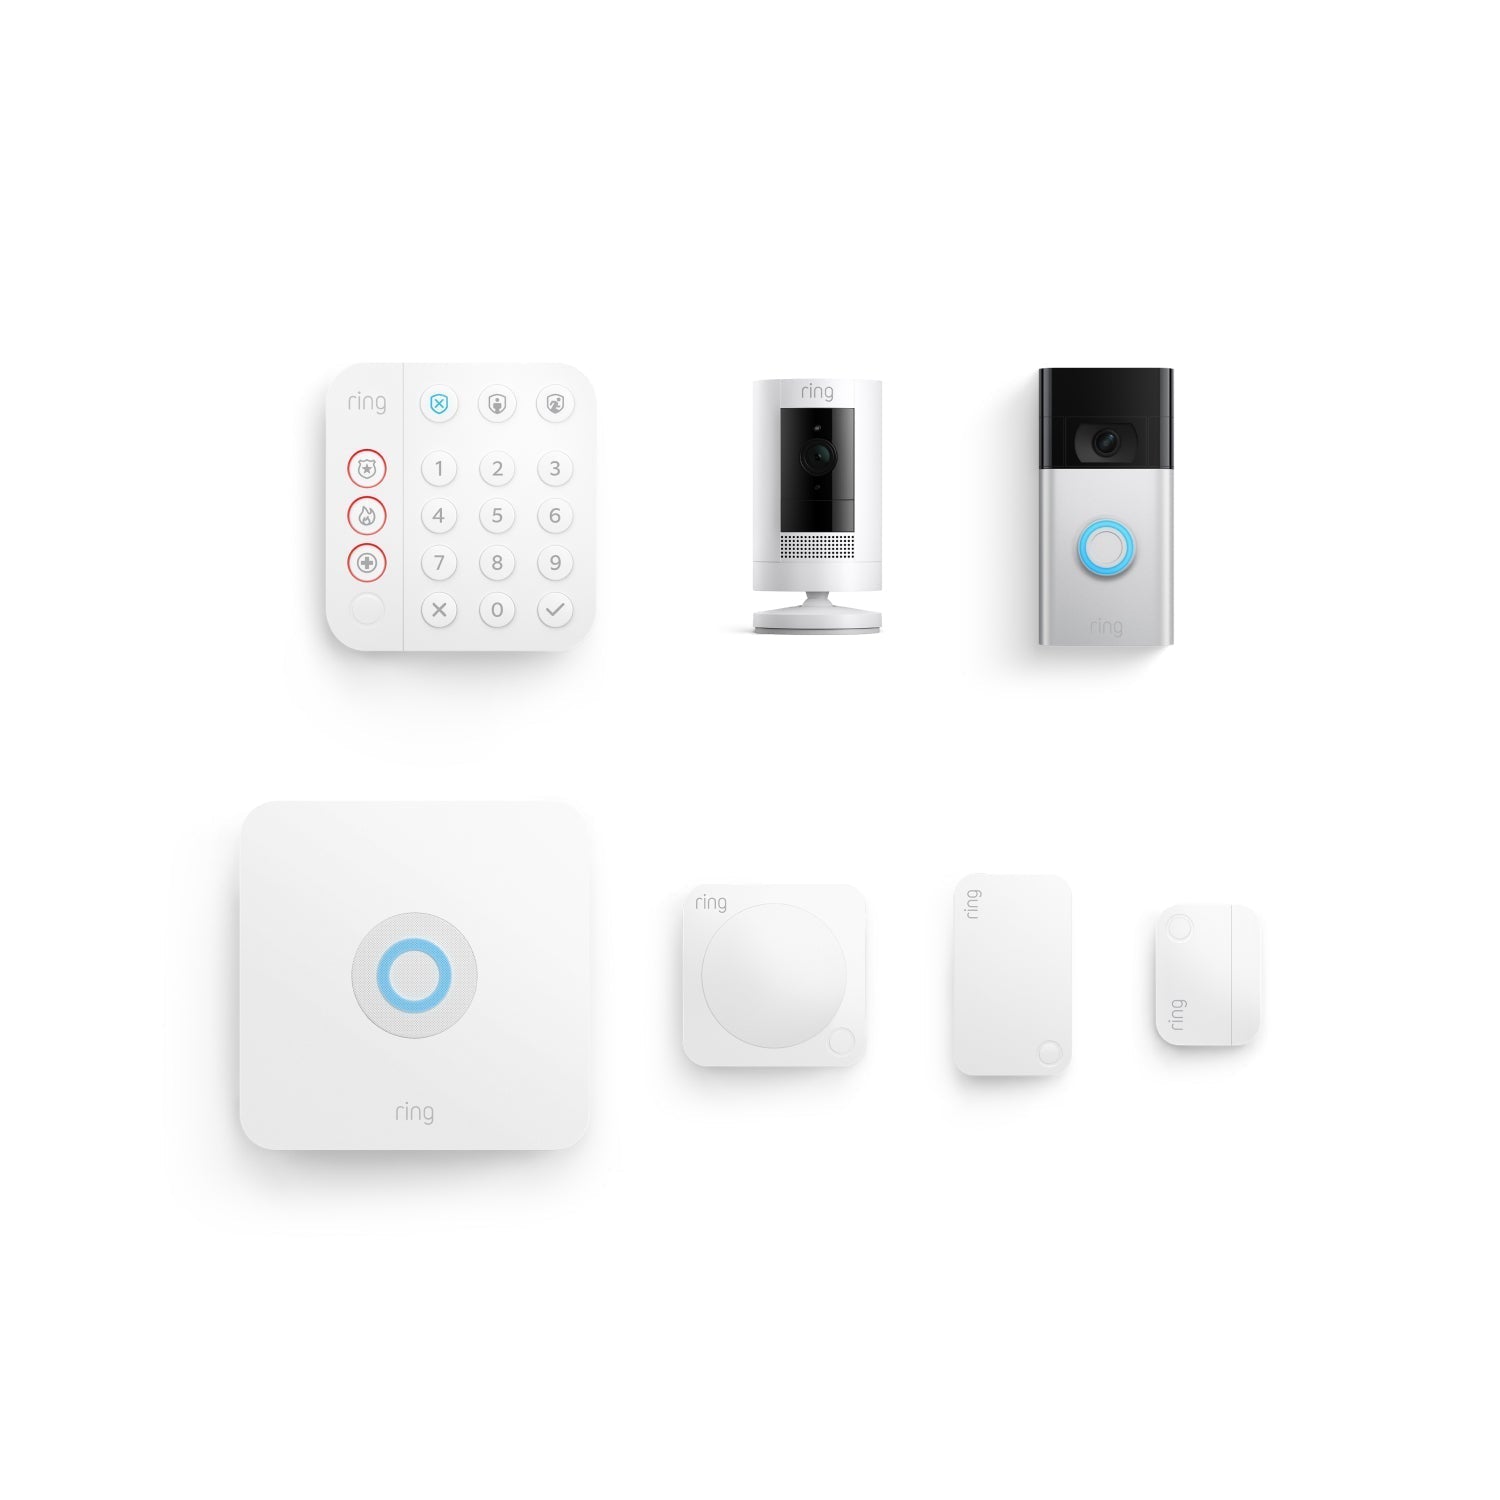 Whole Home Basic Kit (Video Doorbell 2nd Generation + Stick Up Cam Battery + Alarm Security Kit, 5-Piece) - Silver + White